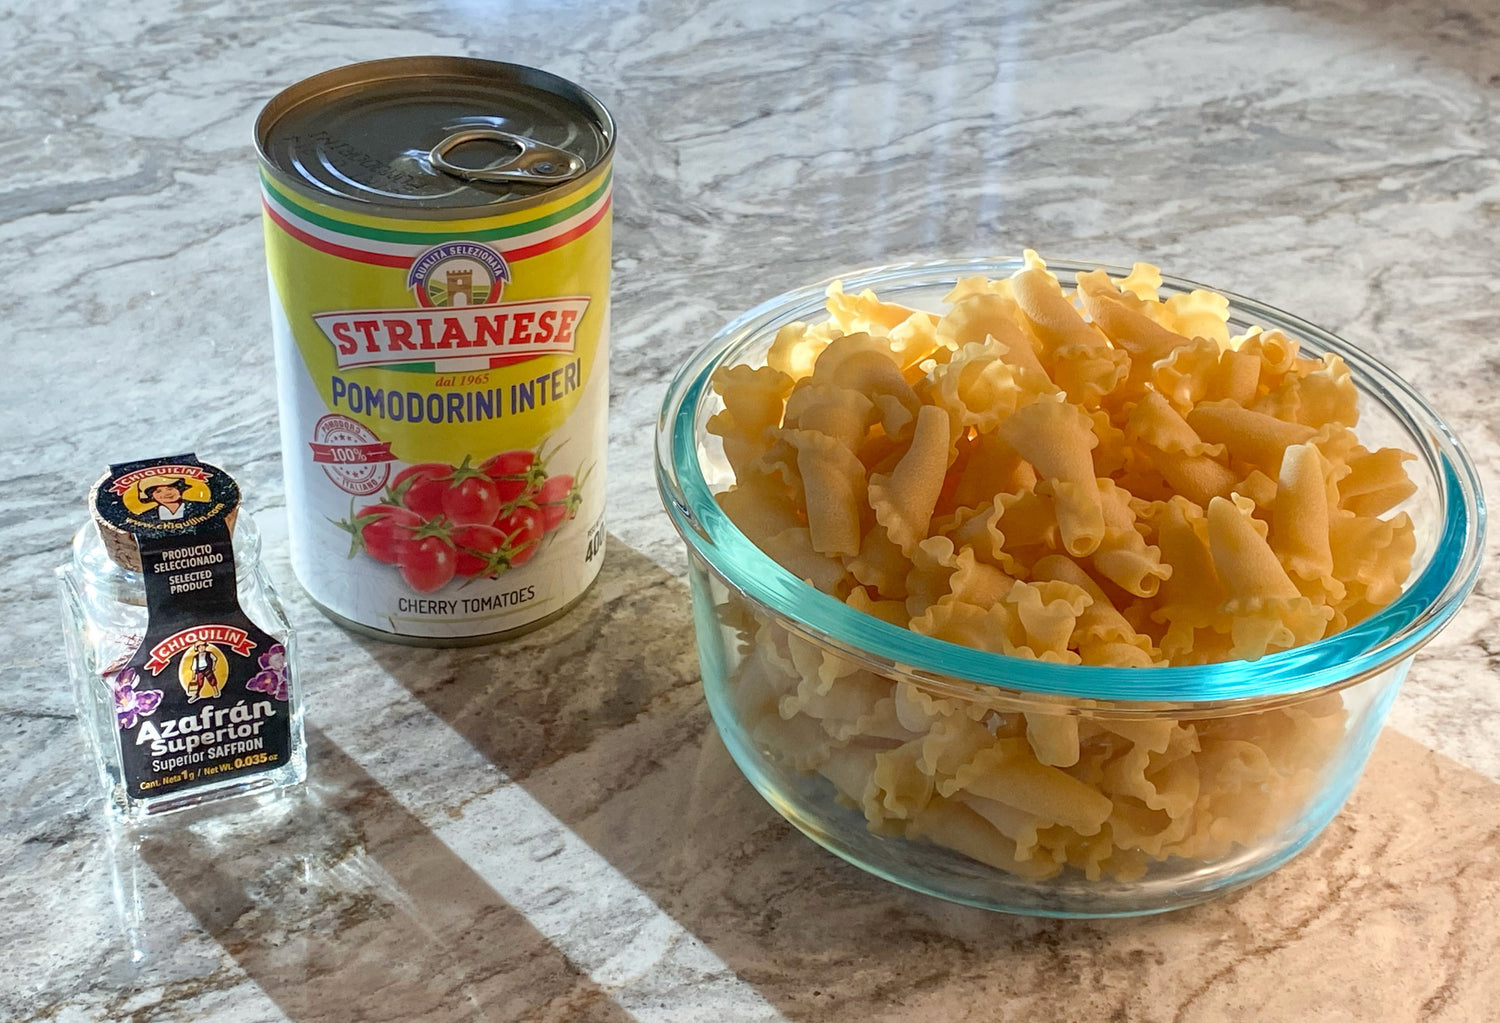 jar of saffron, can of Strianese brand imported cherry tomoatoes with a glass bowl filled with trombe pasta bowl of Trombe